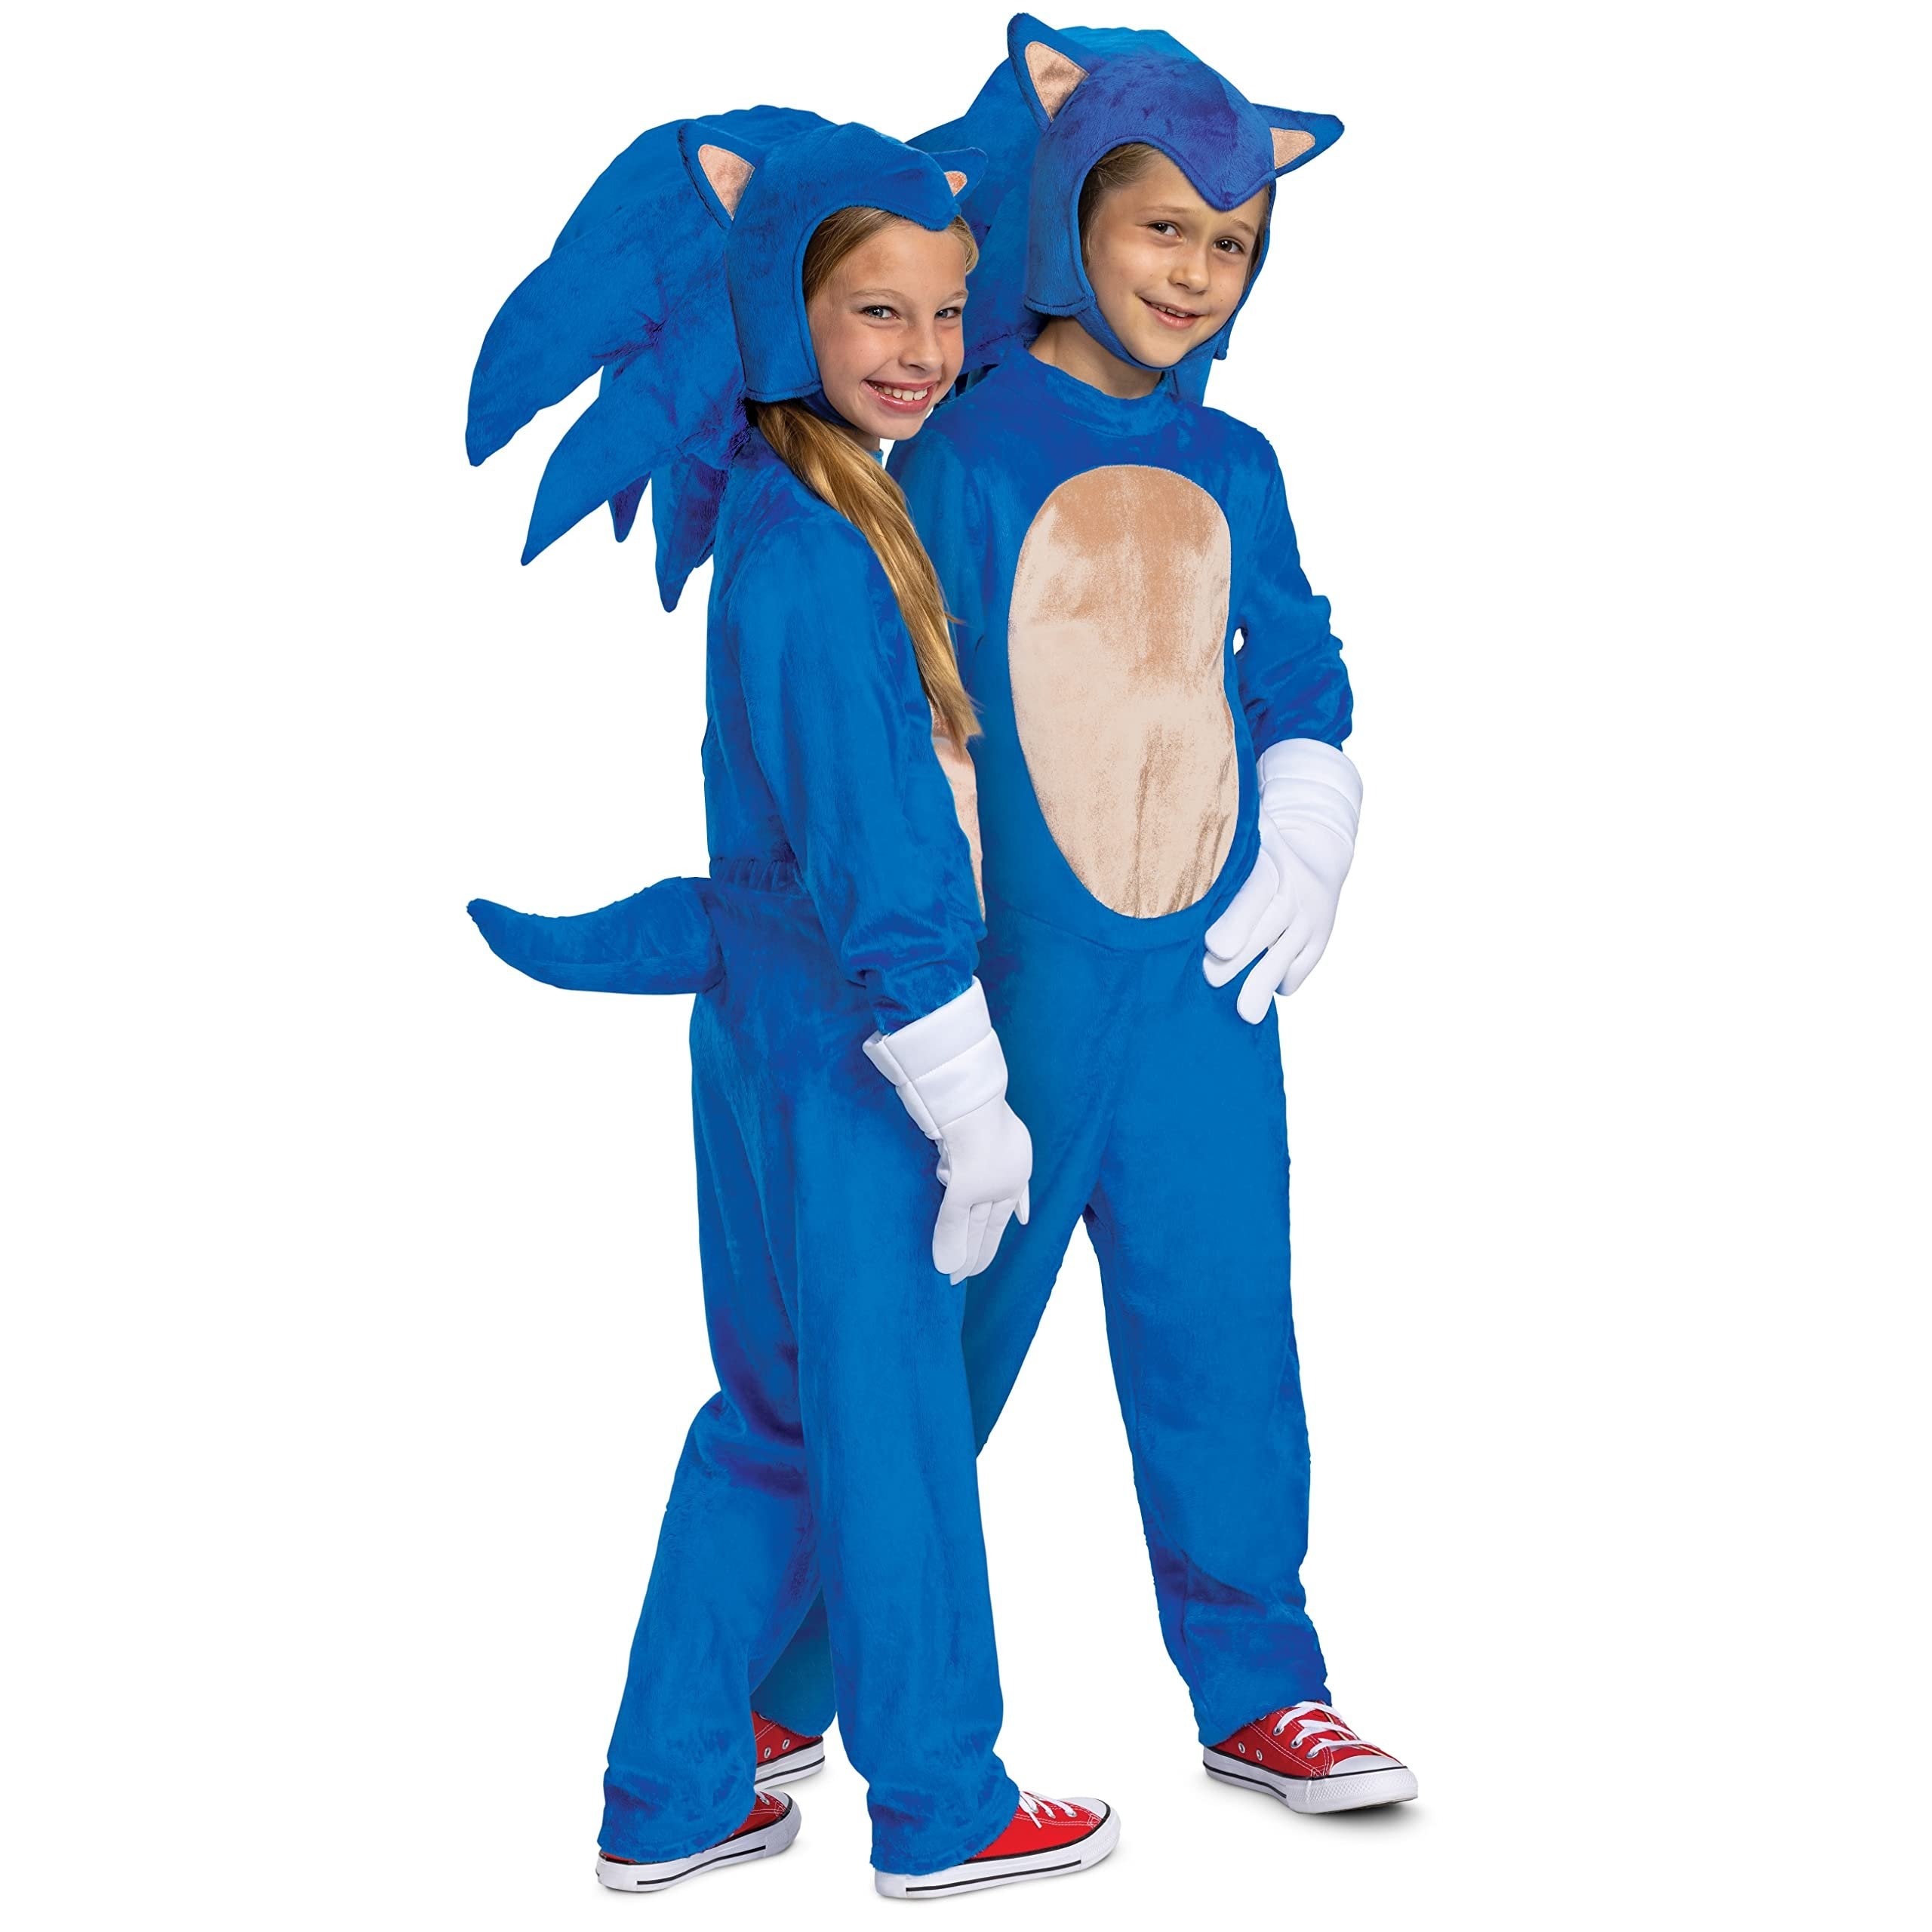 Sonic the Hedgehog Costume, Official Deluxe Sonic Movie Costume and Headpiece, Kids Size Small (4-6)